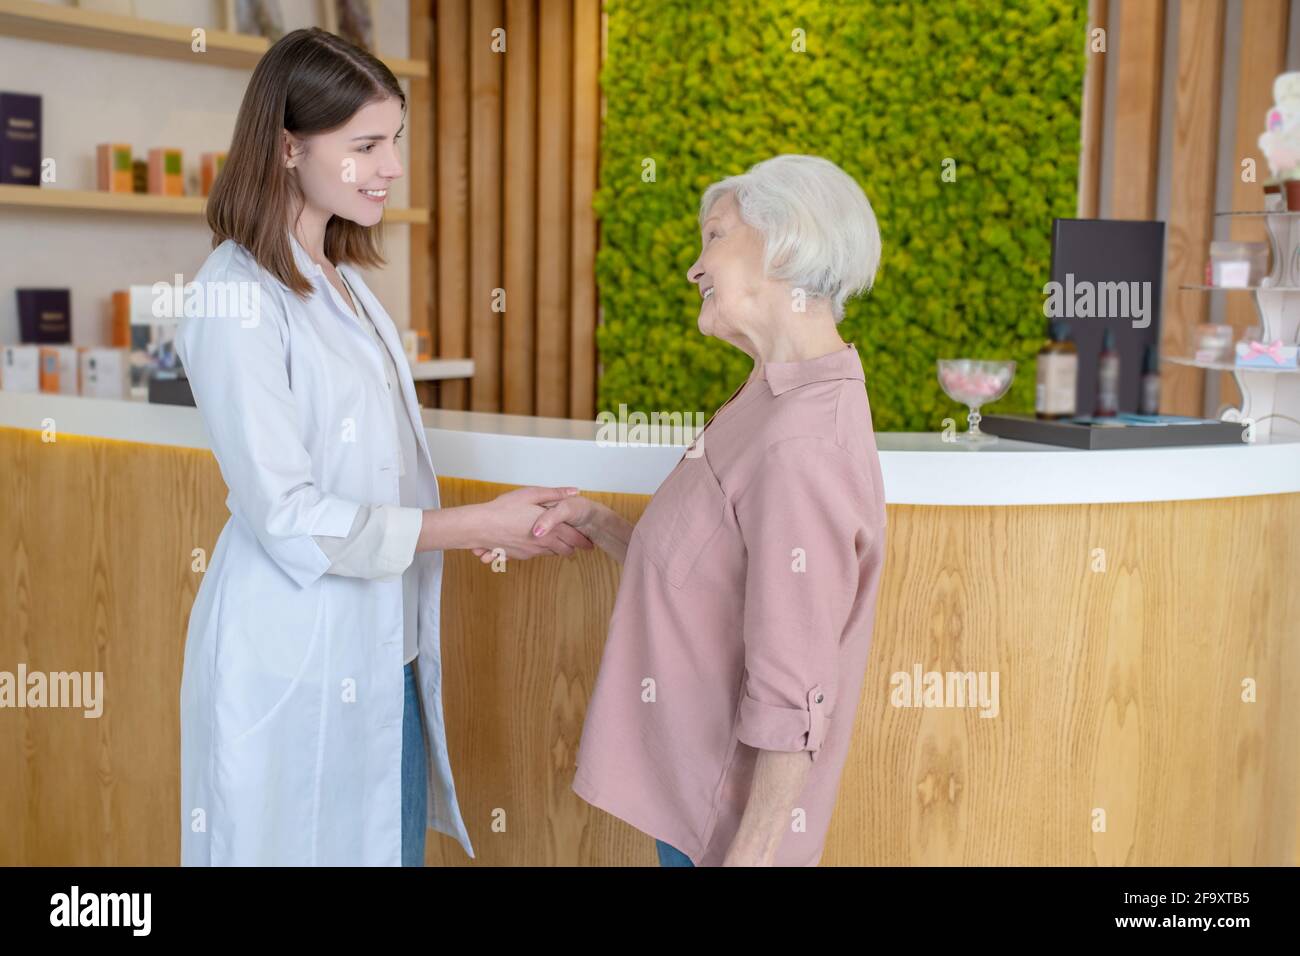 Pretty young cosmetologist greeting a mature customer Stock Photo